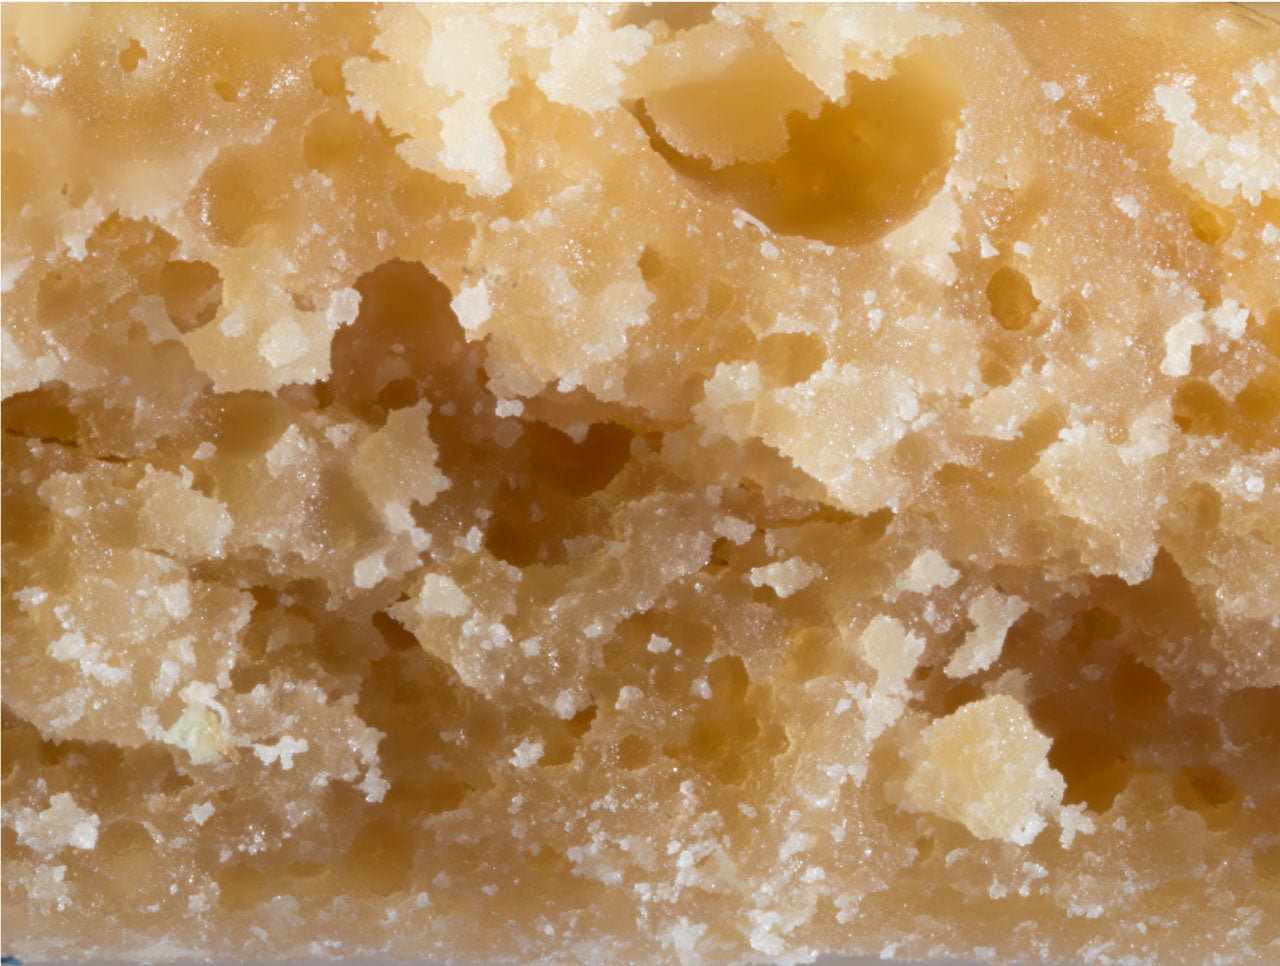 Close up image of crumble dabs.